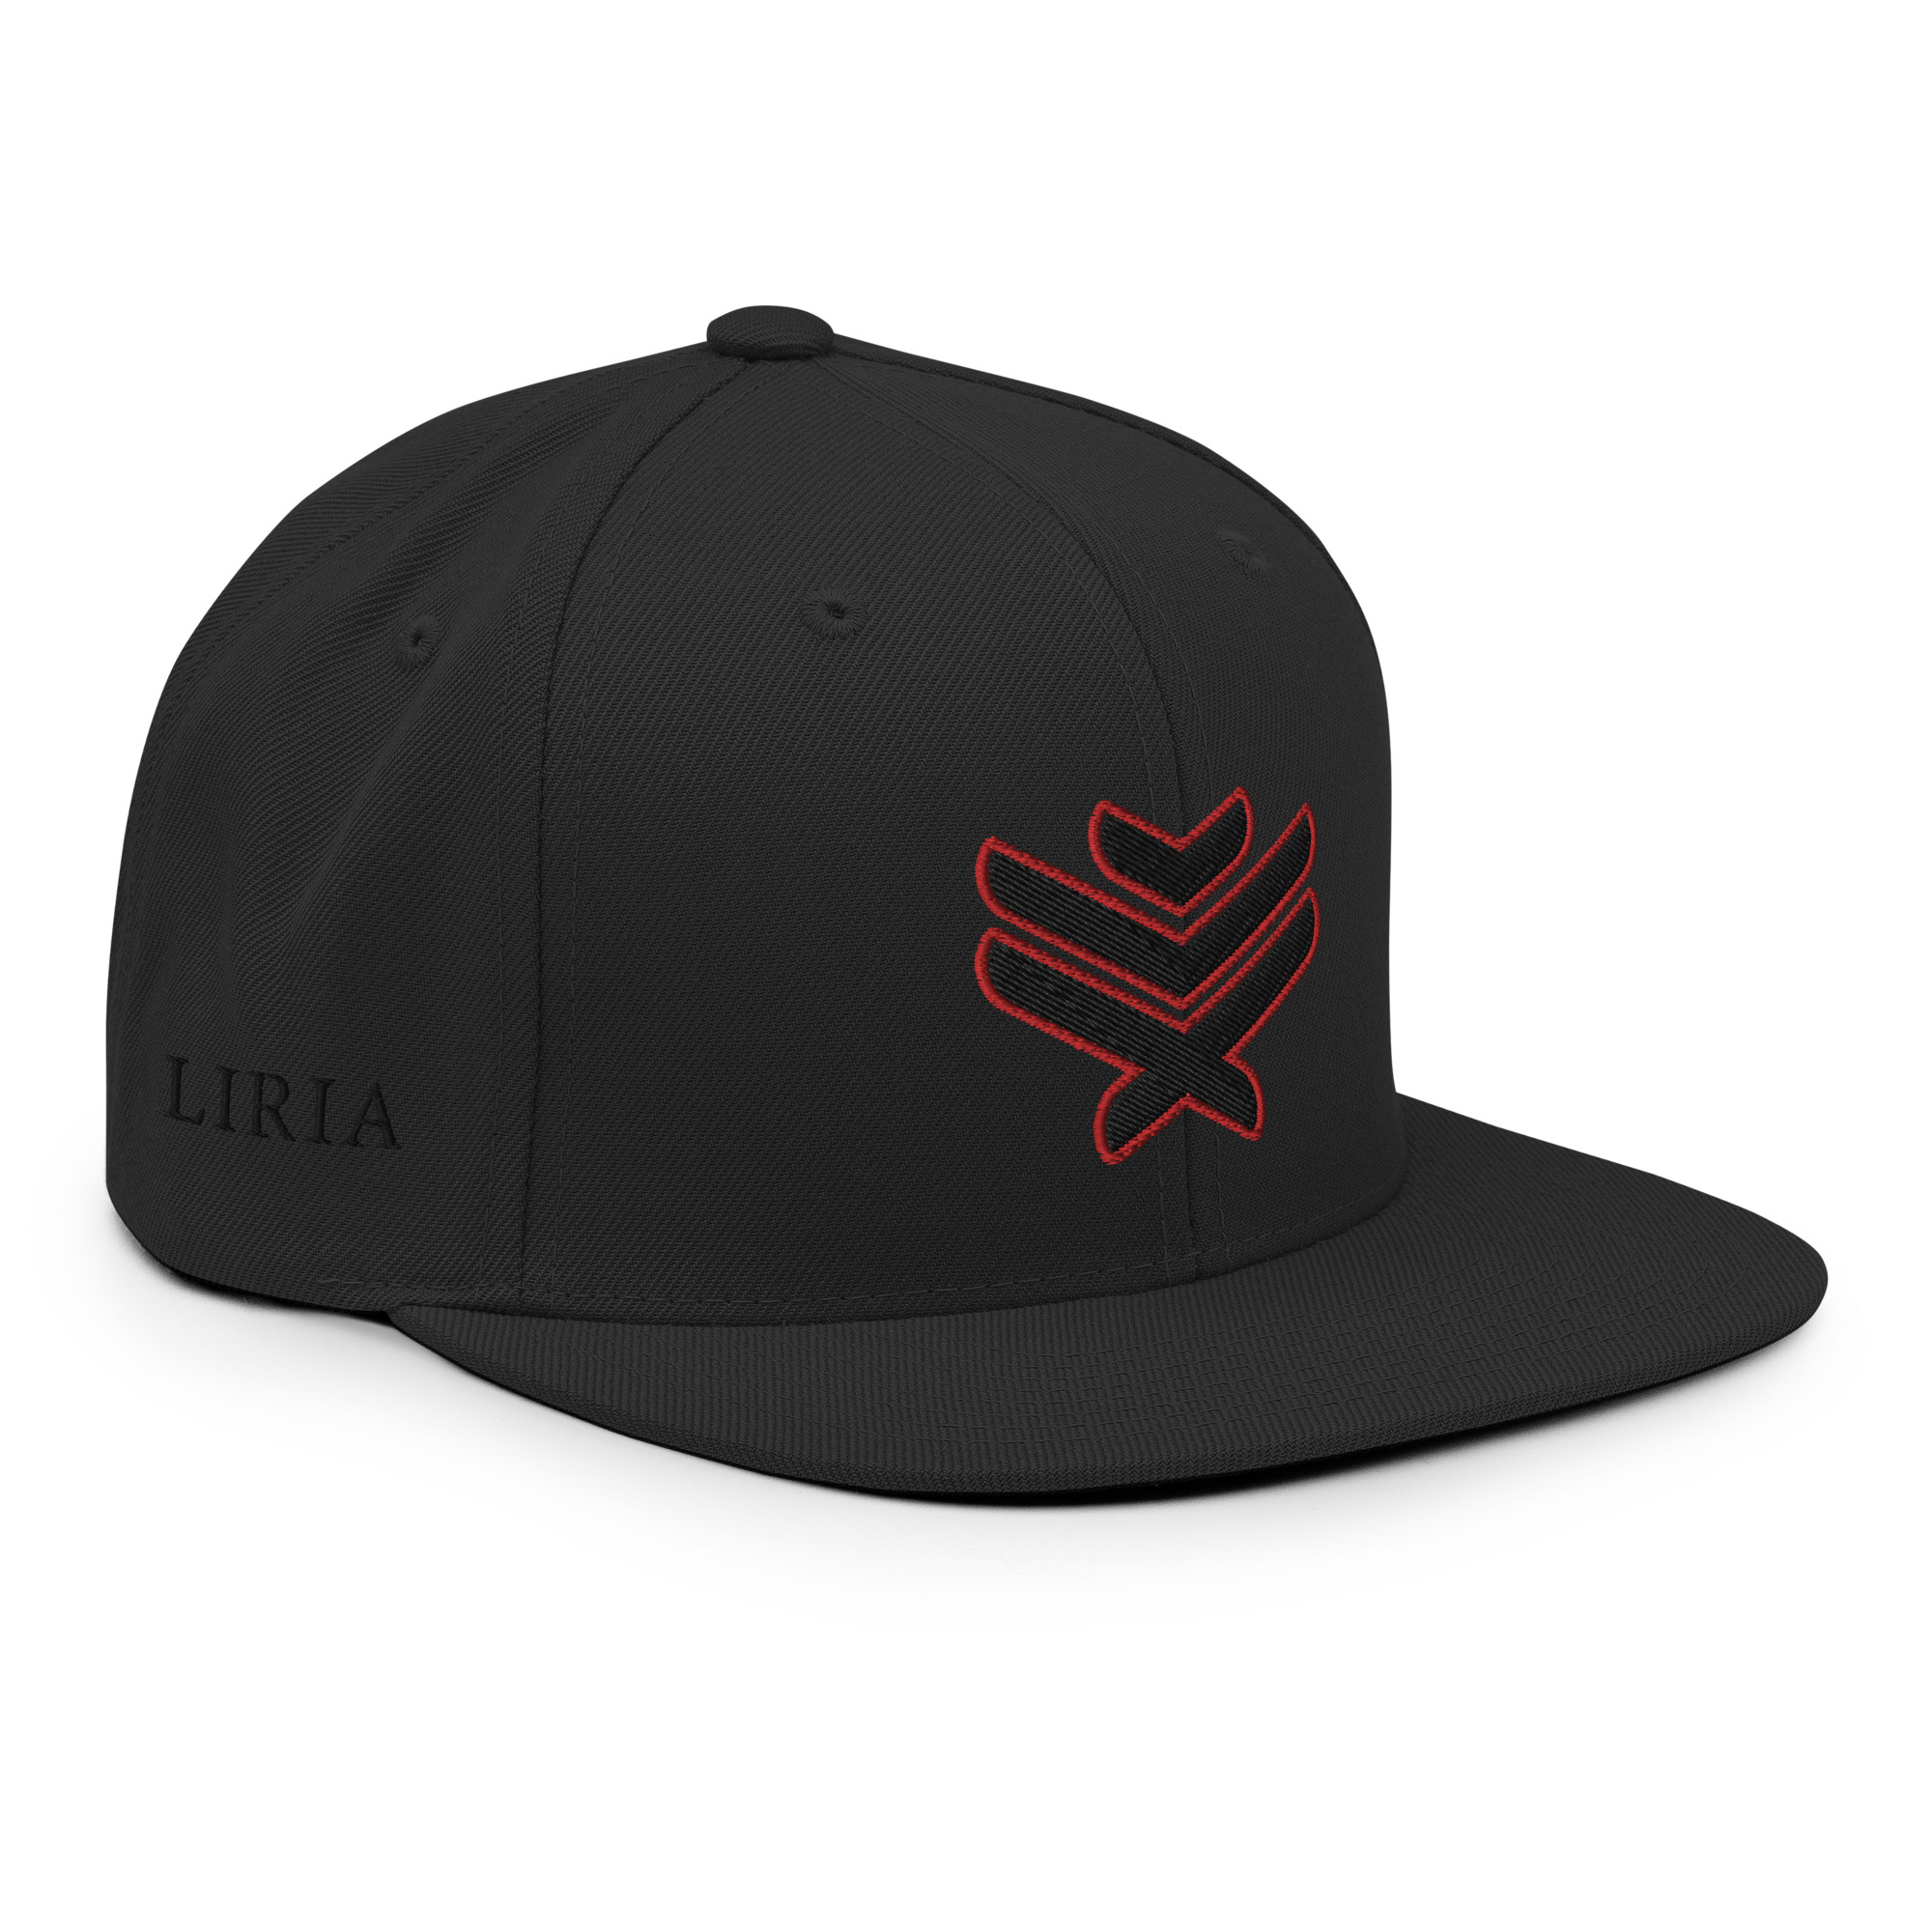 LIRIA Eagle Outlined Embroidered Snapback Hat